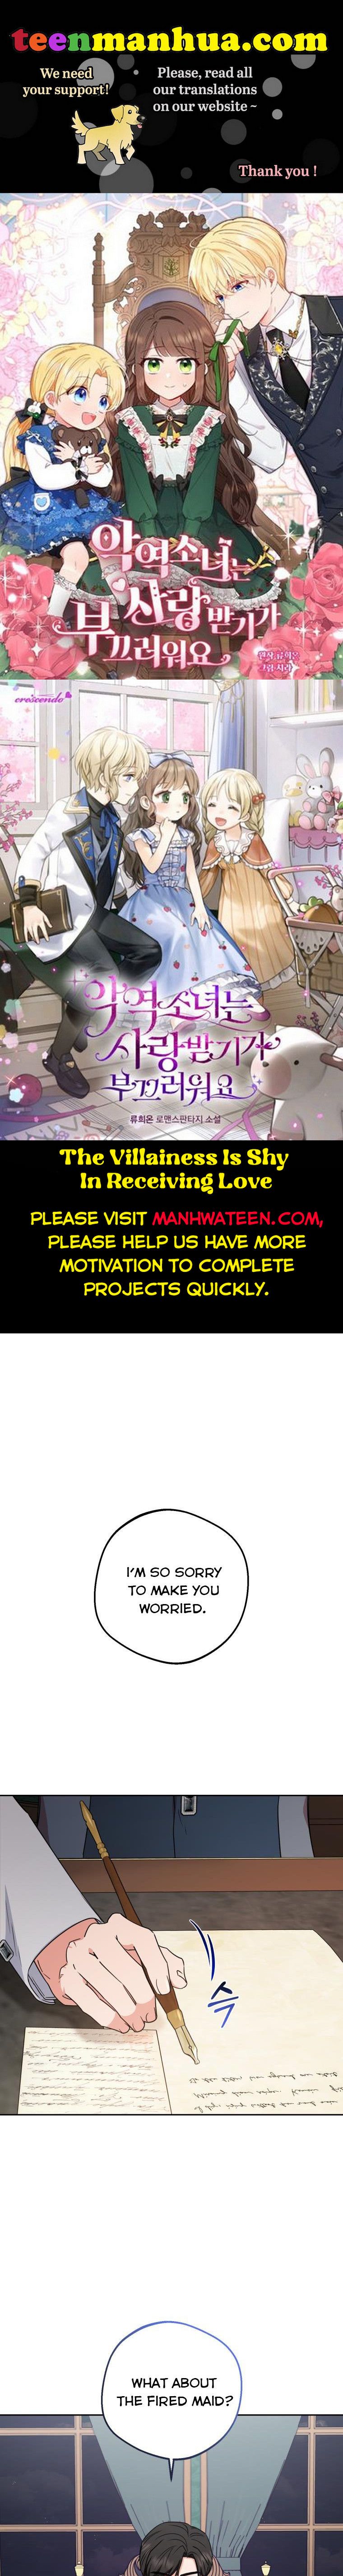 The Villainess Is Shy In Receiving Love Chapter 9 page 1